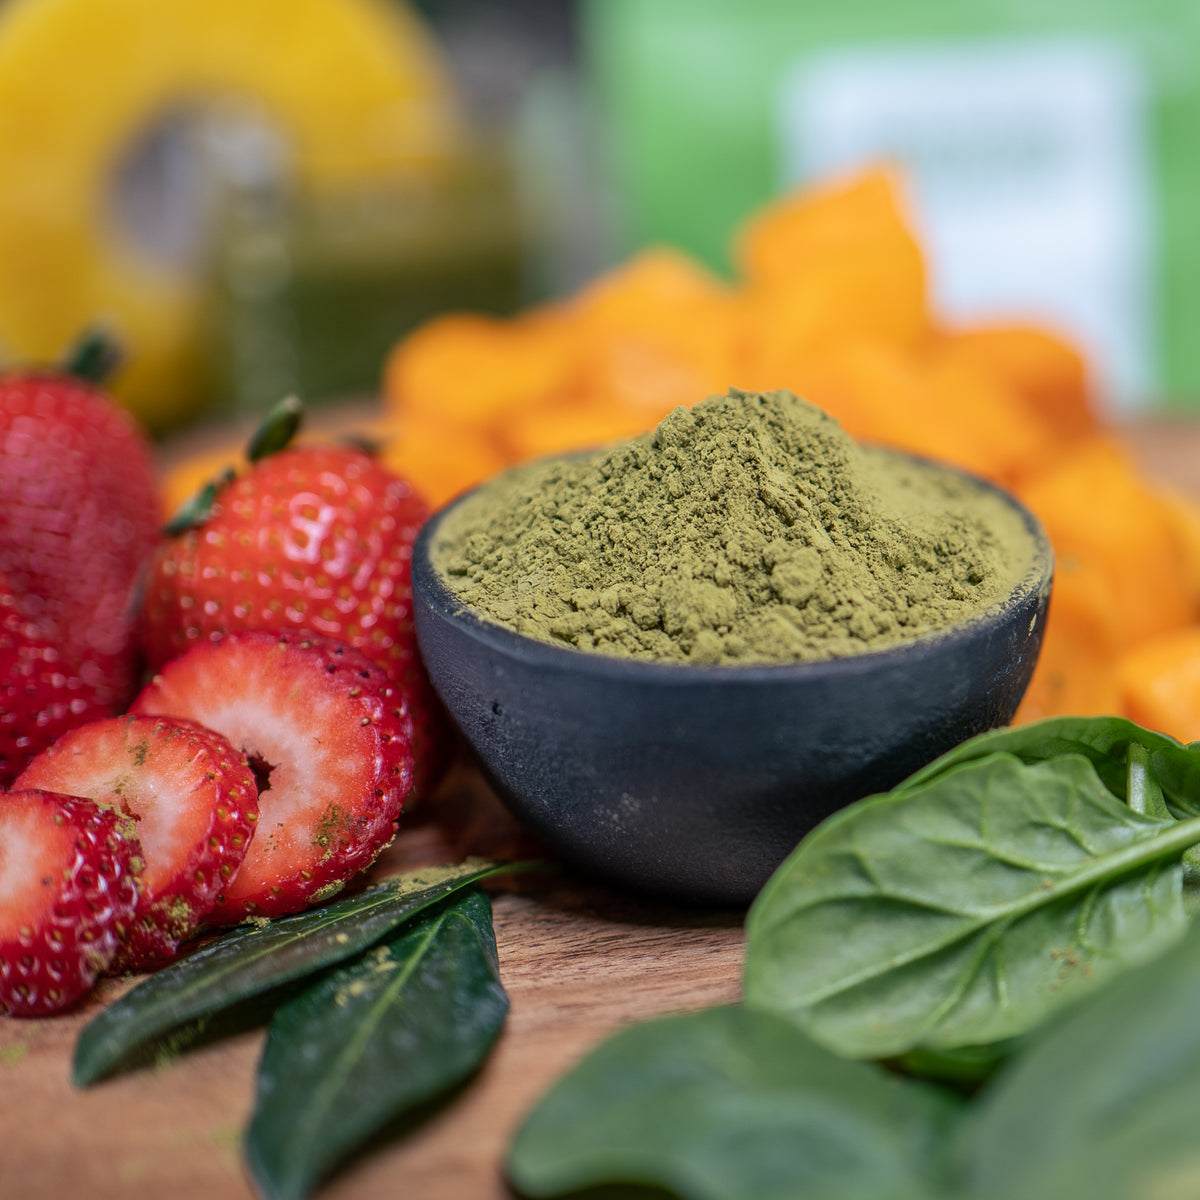 Lifestyle photo, matcha powder in bowl, surrounded by other smoothie ingredients like strawberries, basil, squash.